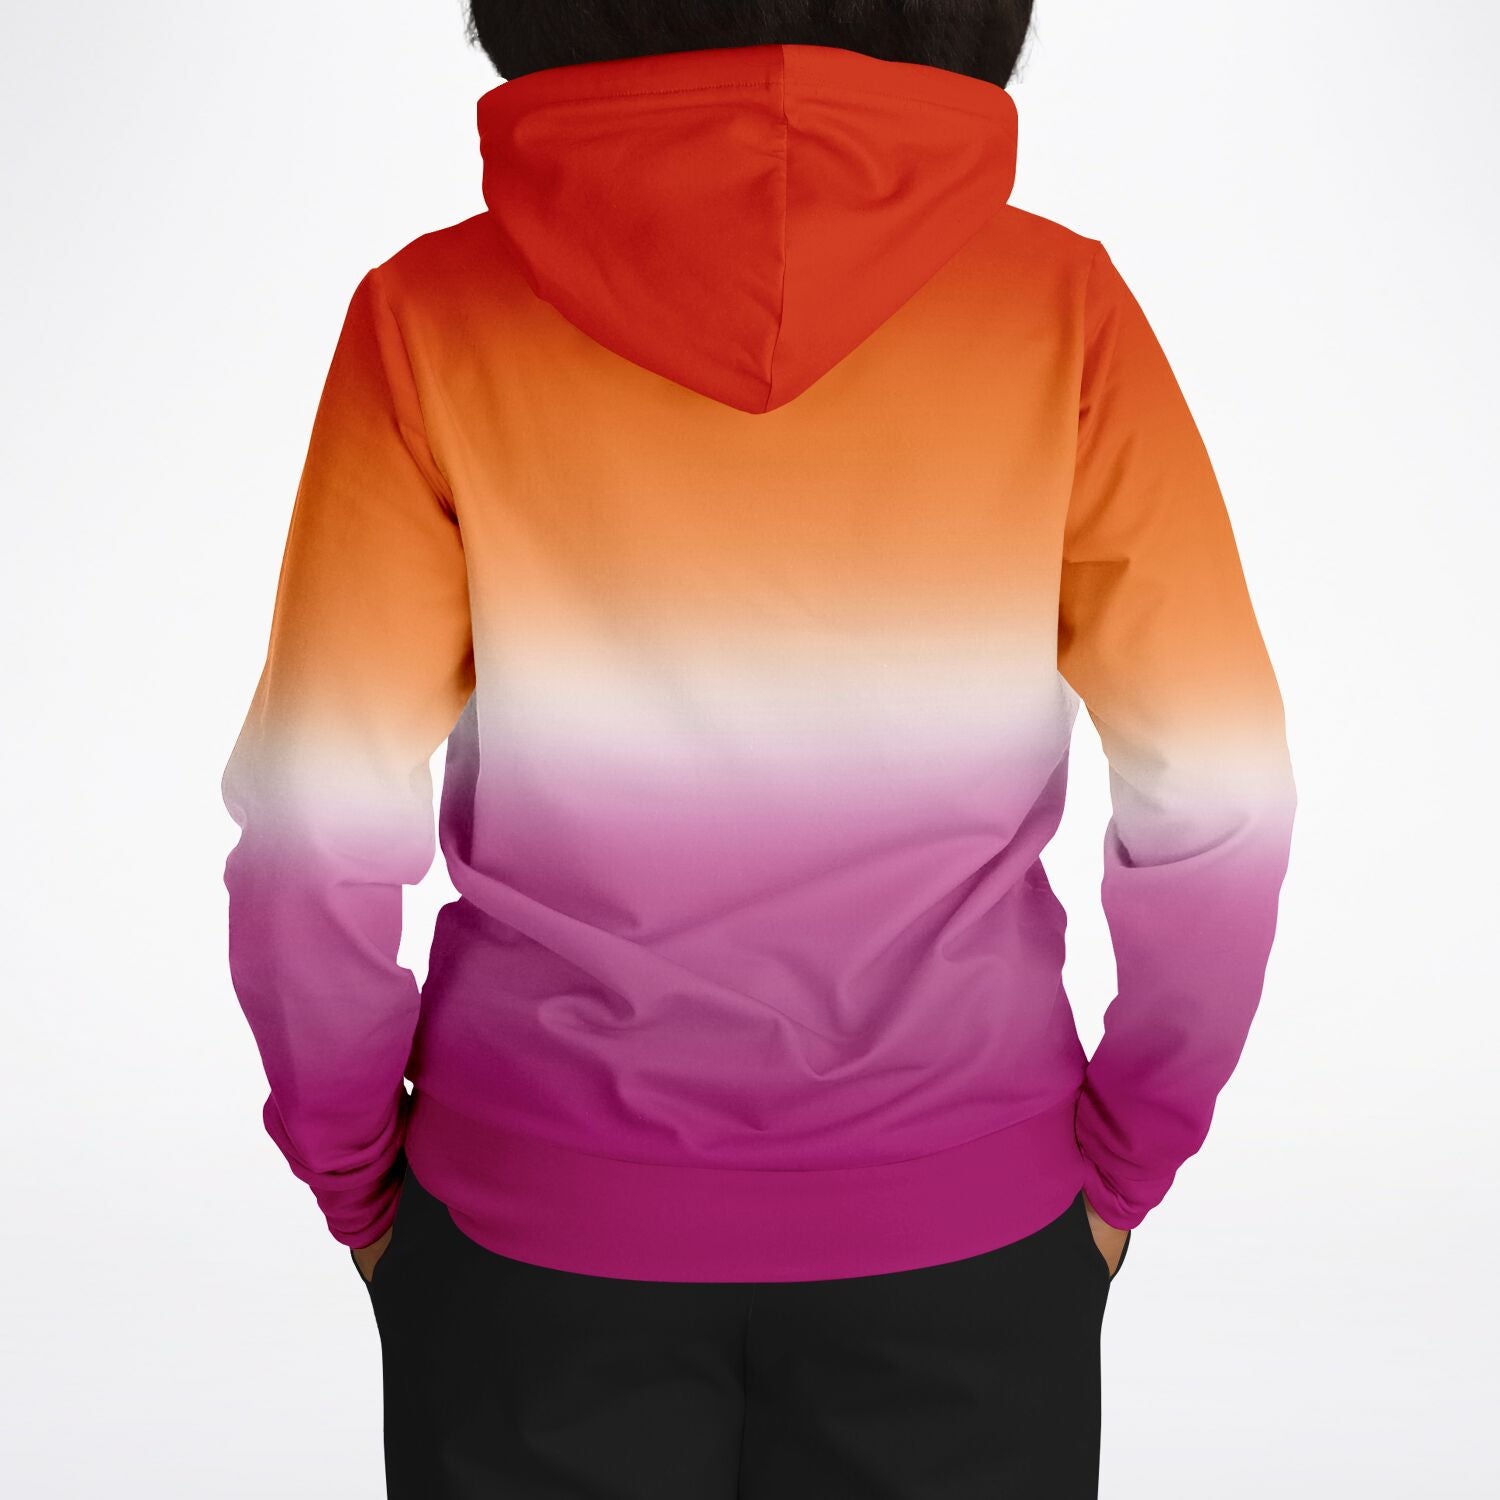 Lesbian Pride Ombre Pullover Hoodie